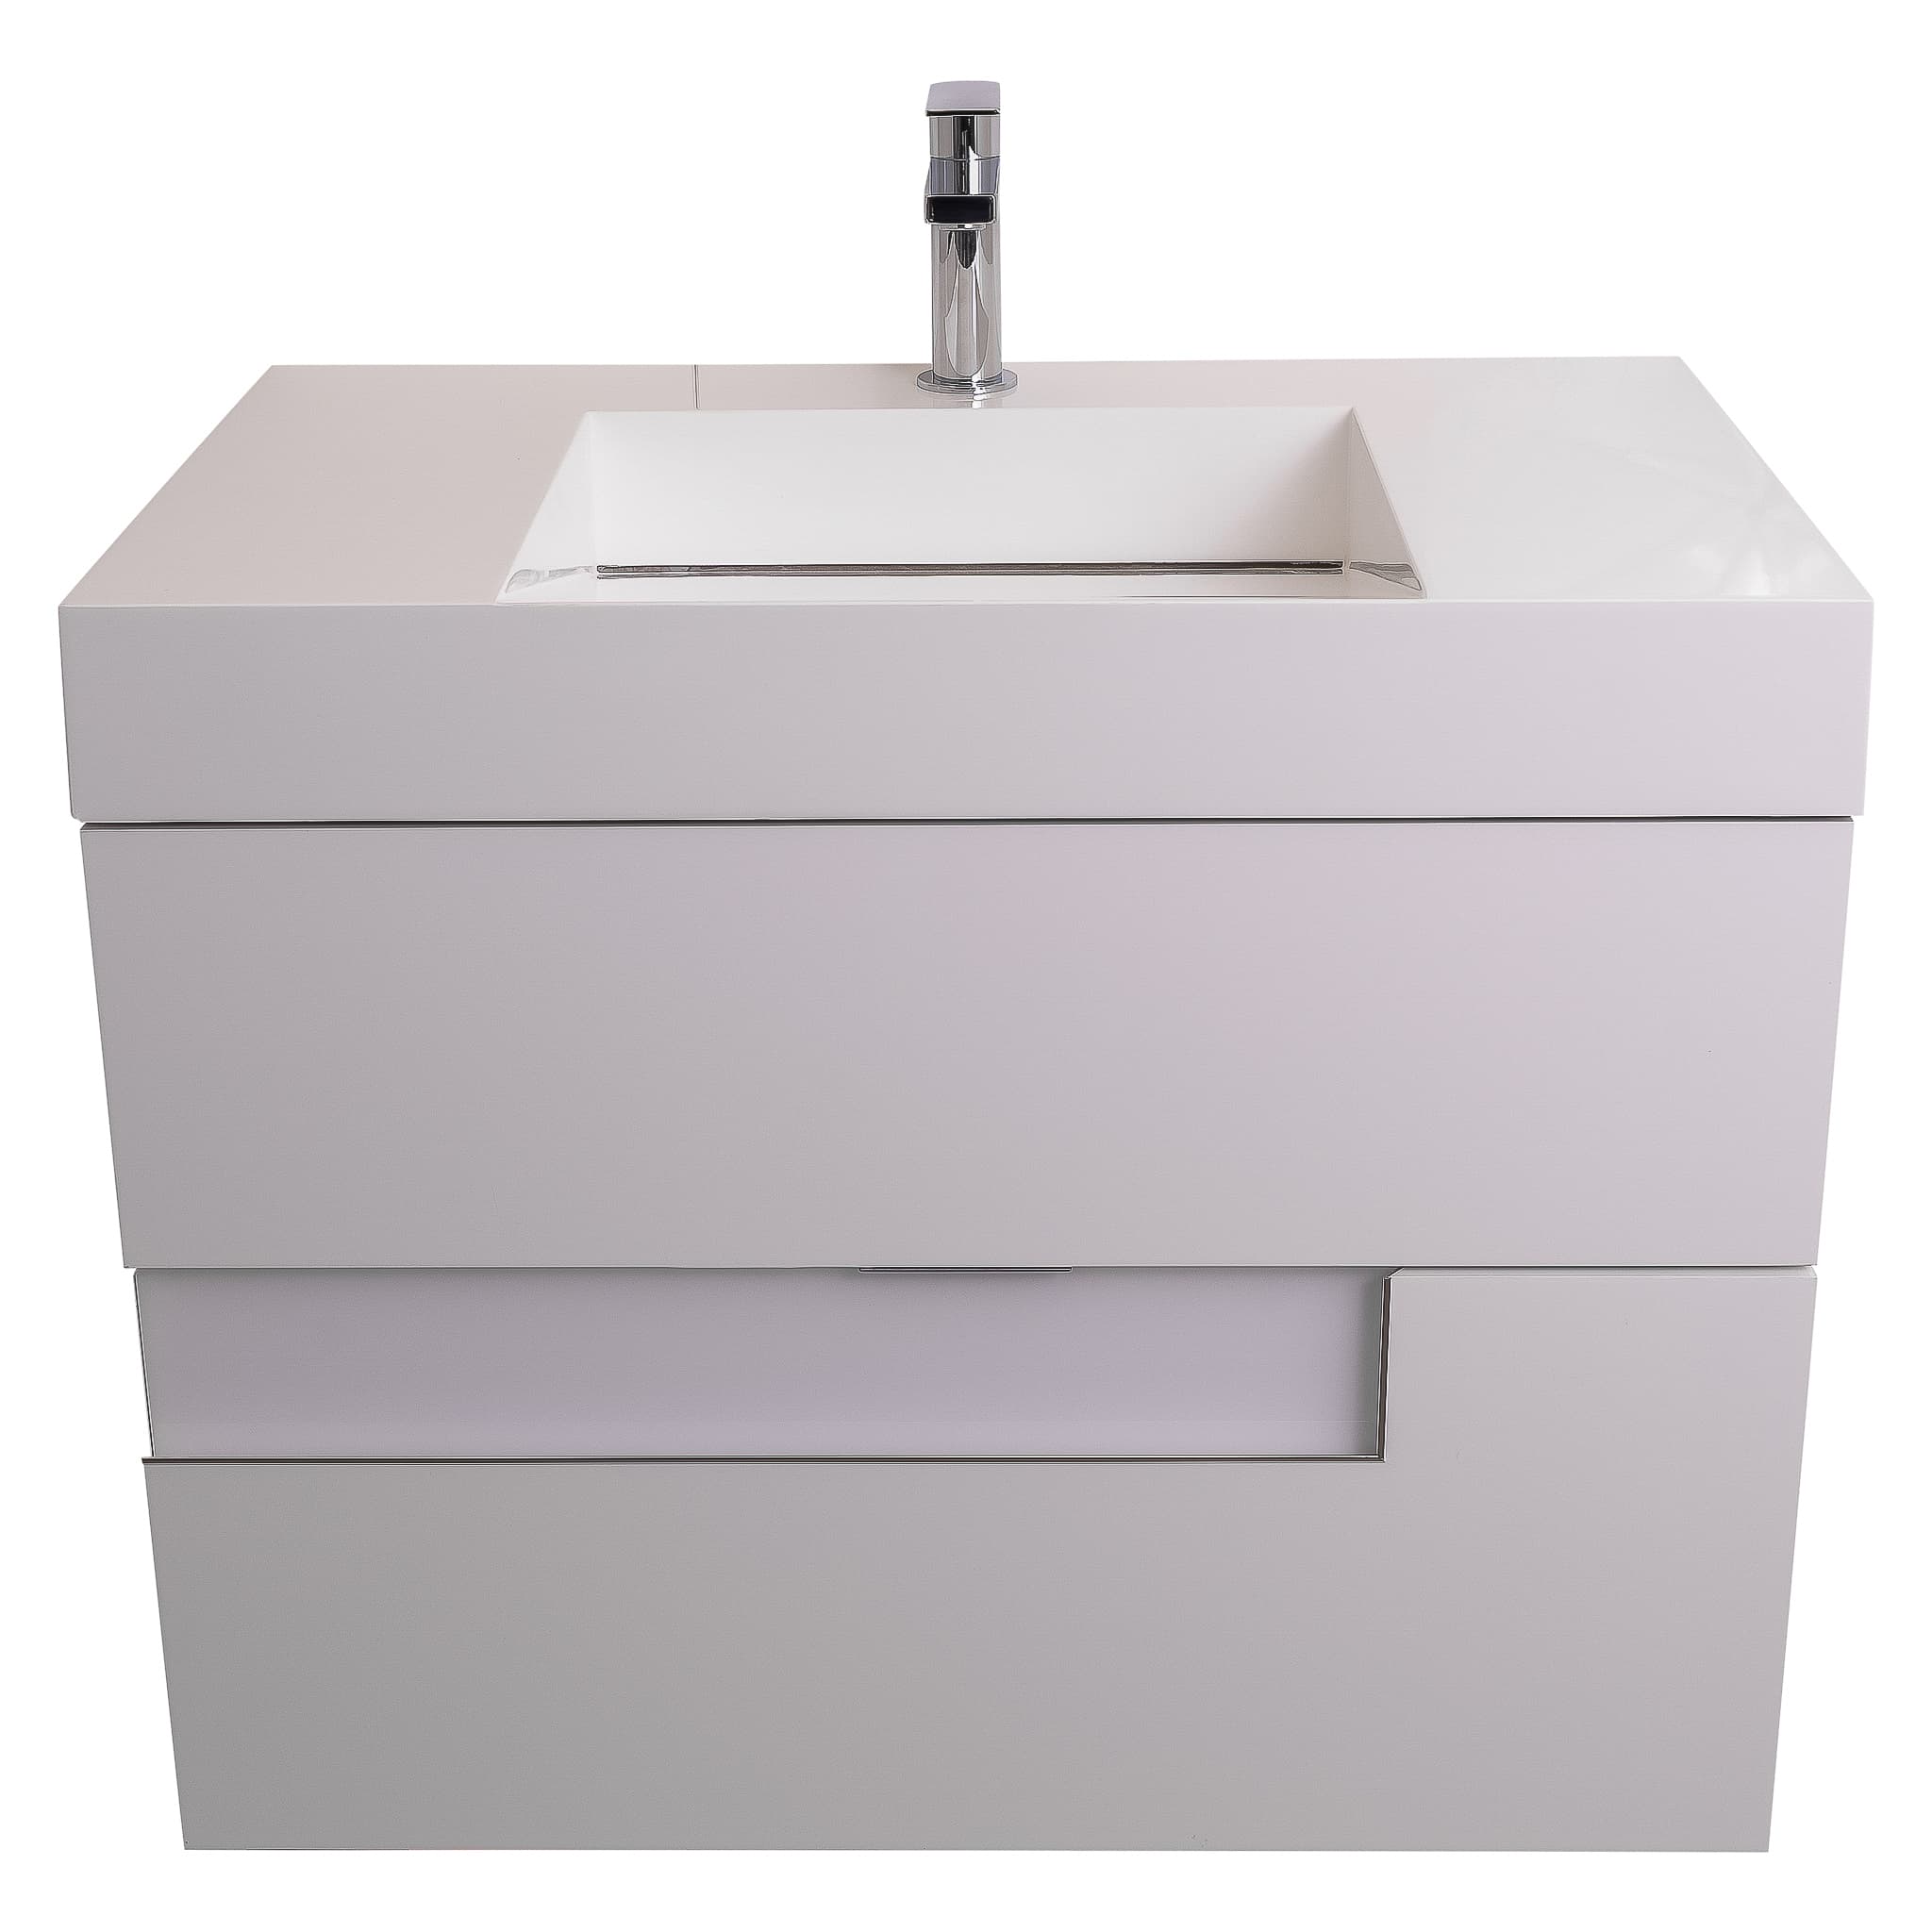 Vision 39.5 White High Gloss Cabinet, Infinity Cultured Marble Sink, Wall Mounted Modern Vanity Set